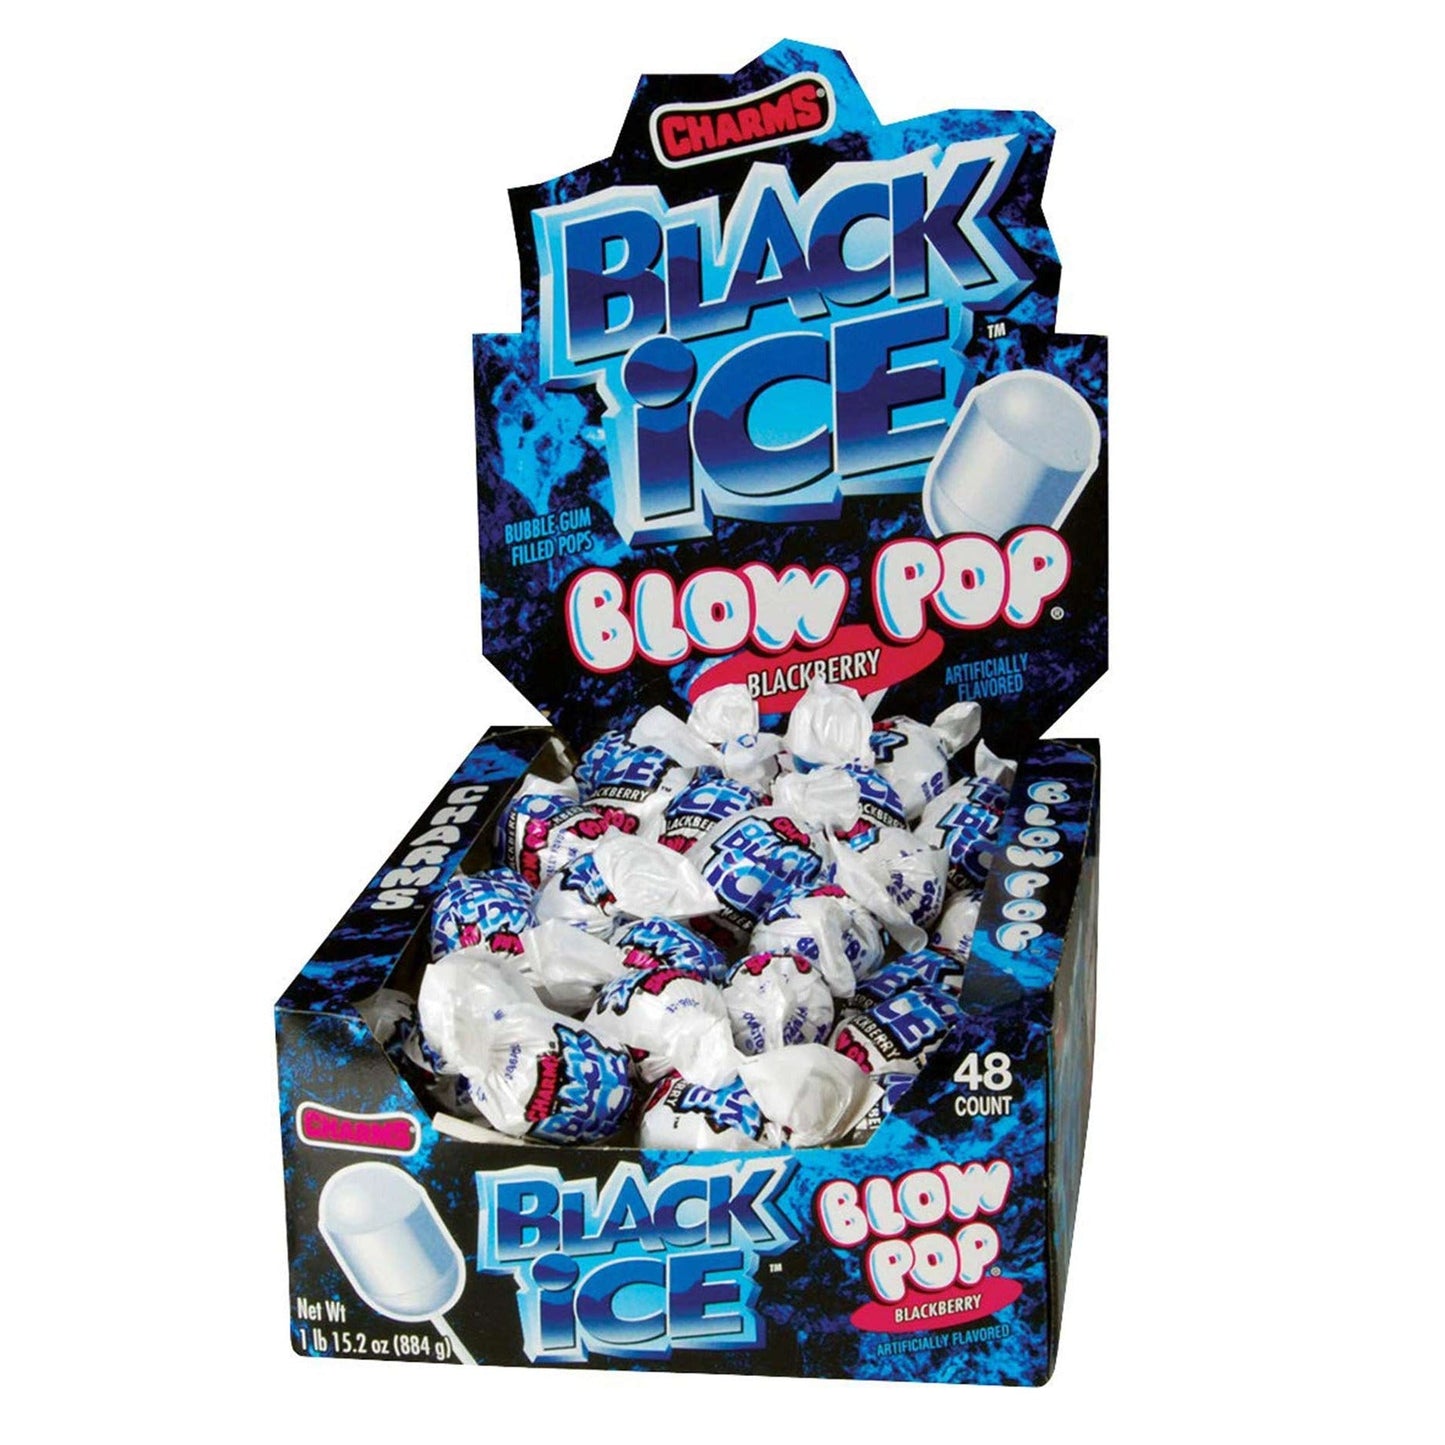 Charms Black Ice Blow Pops Blackberry Flavor (18.4g) (48ct)